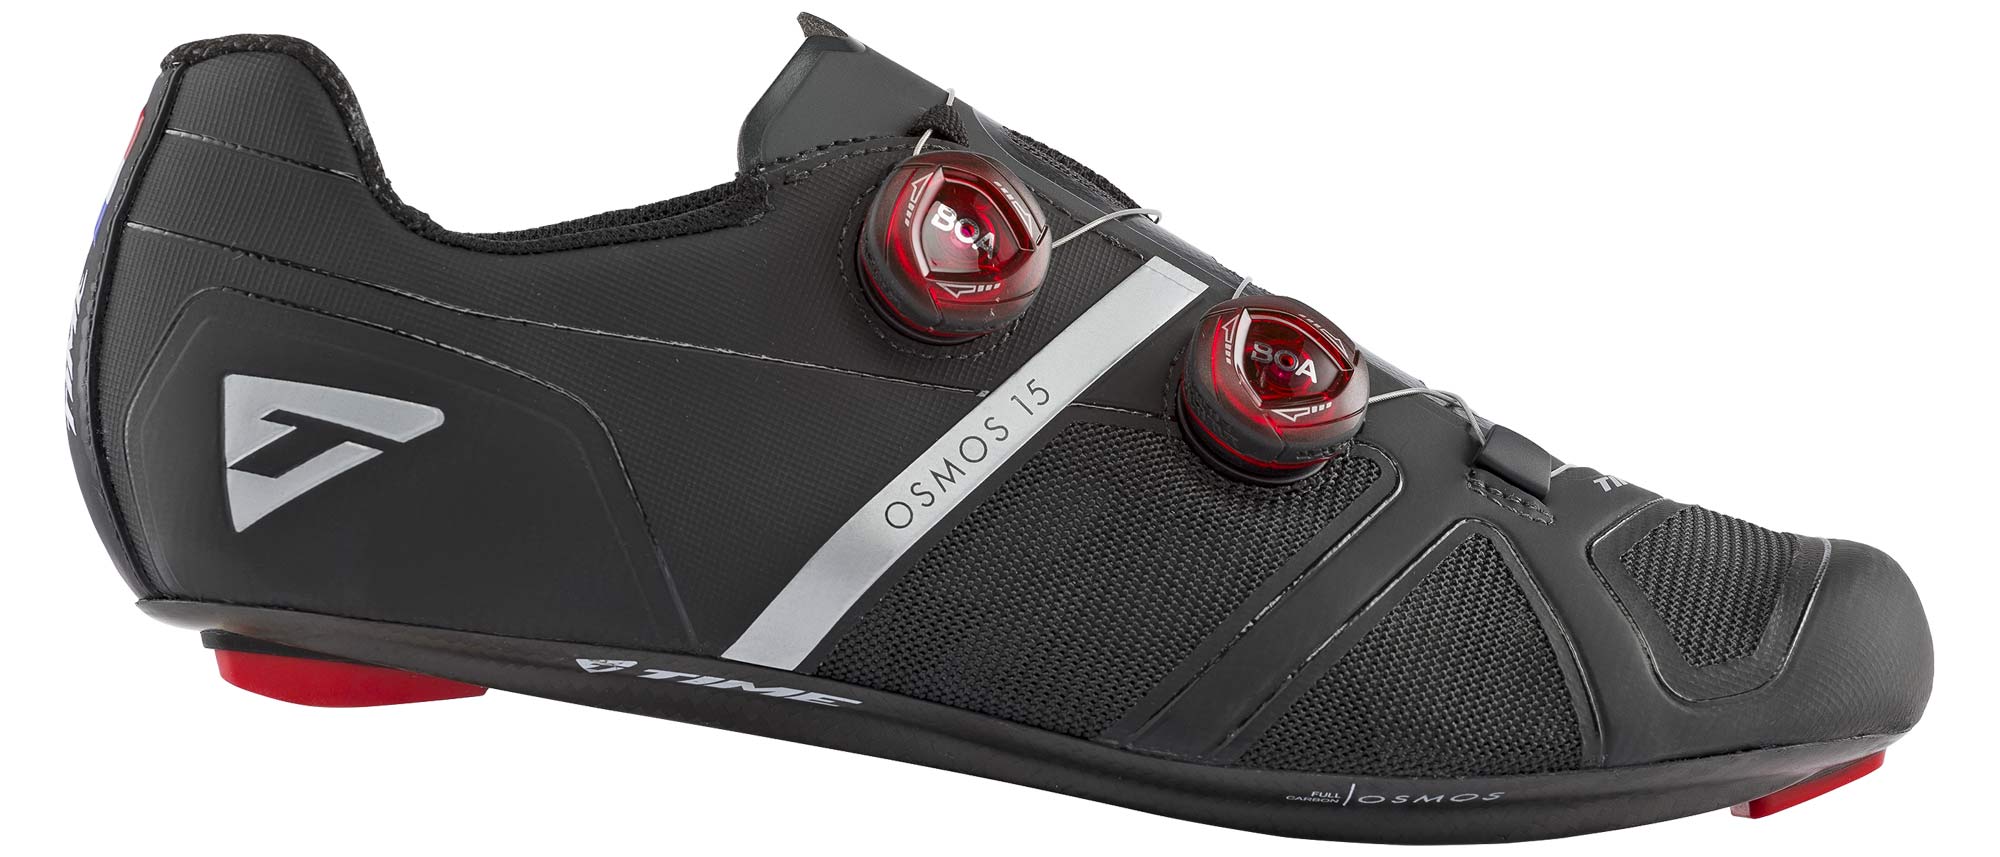 Time Osmos dials up broad, all-new carbon performance road shoe